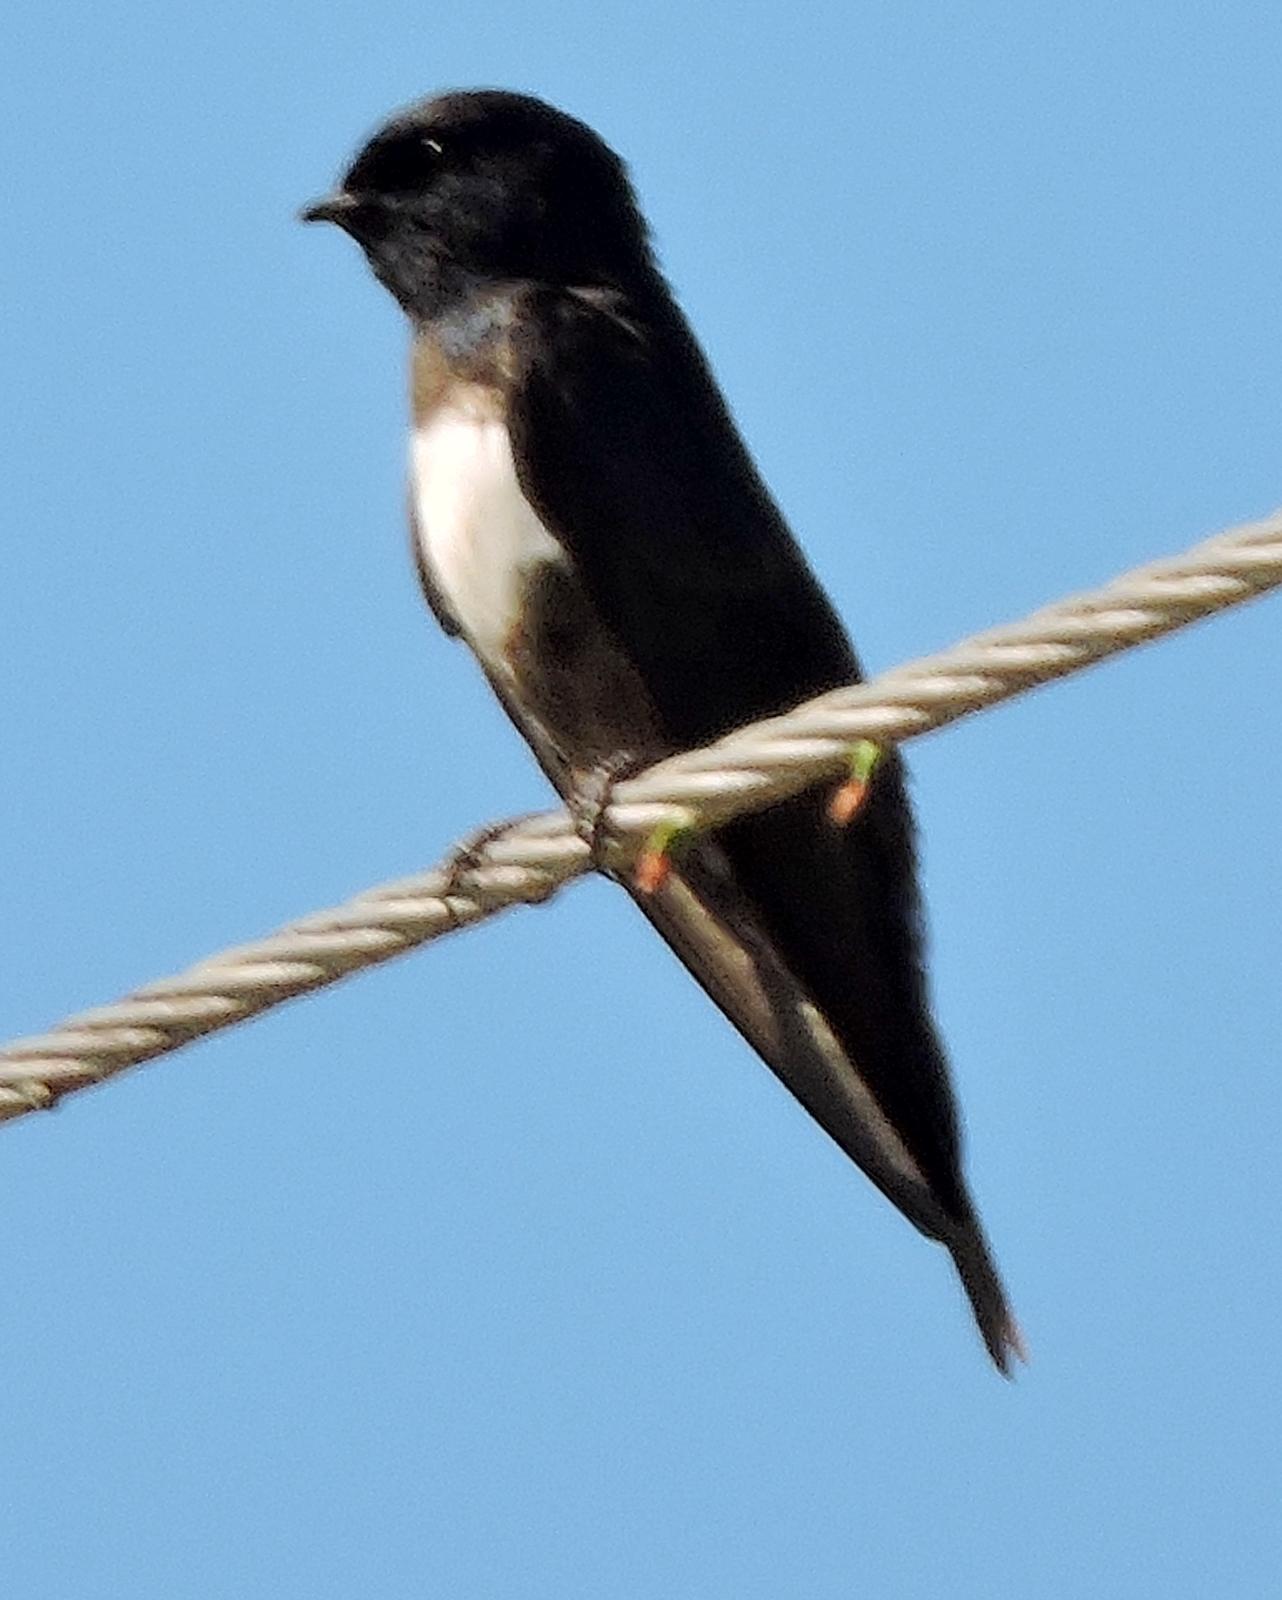 White-banded Swallow Photo by Peter Lowe